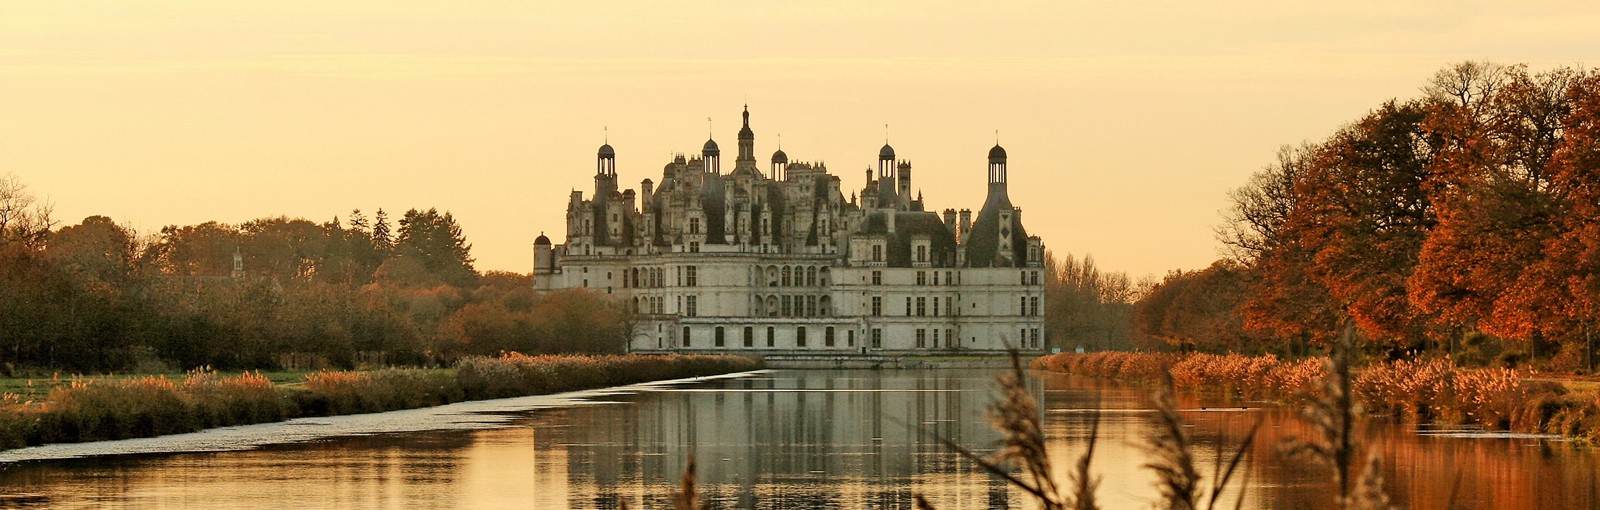 Tours CHAMBORD, CHENONCEAU AND CHEVERNY OR CHAUMONT OR BLOIS - Full days - Day tours from Paris